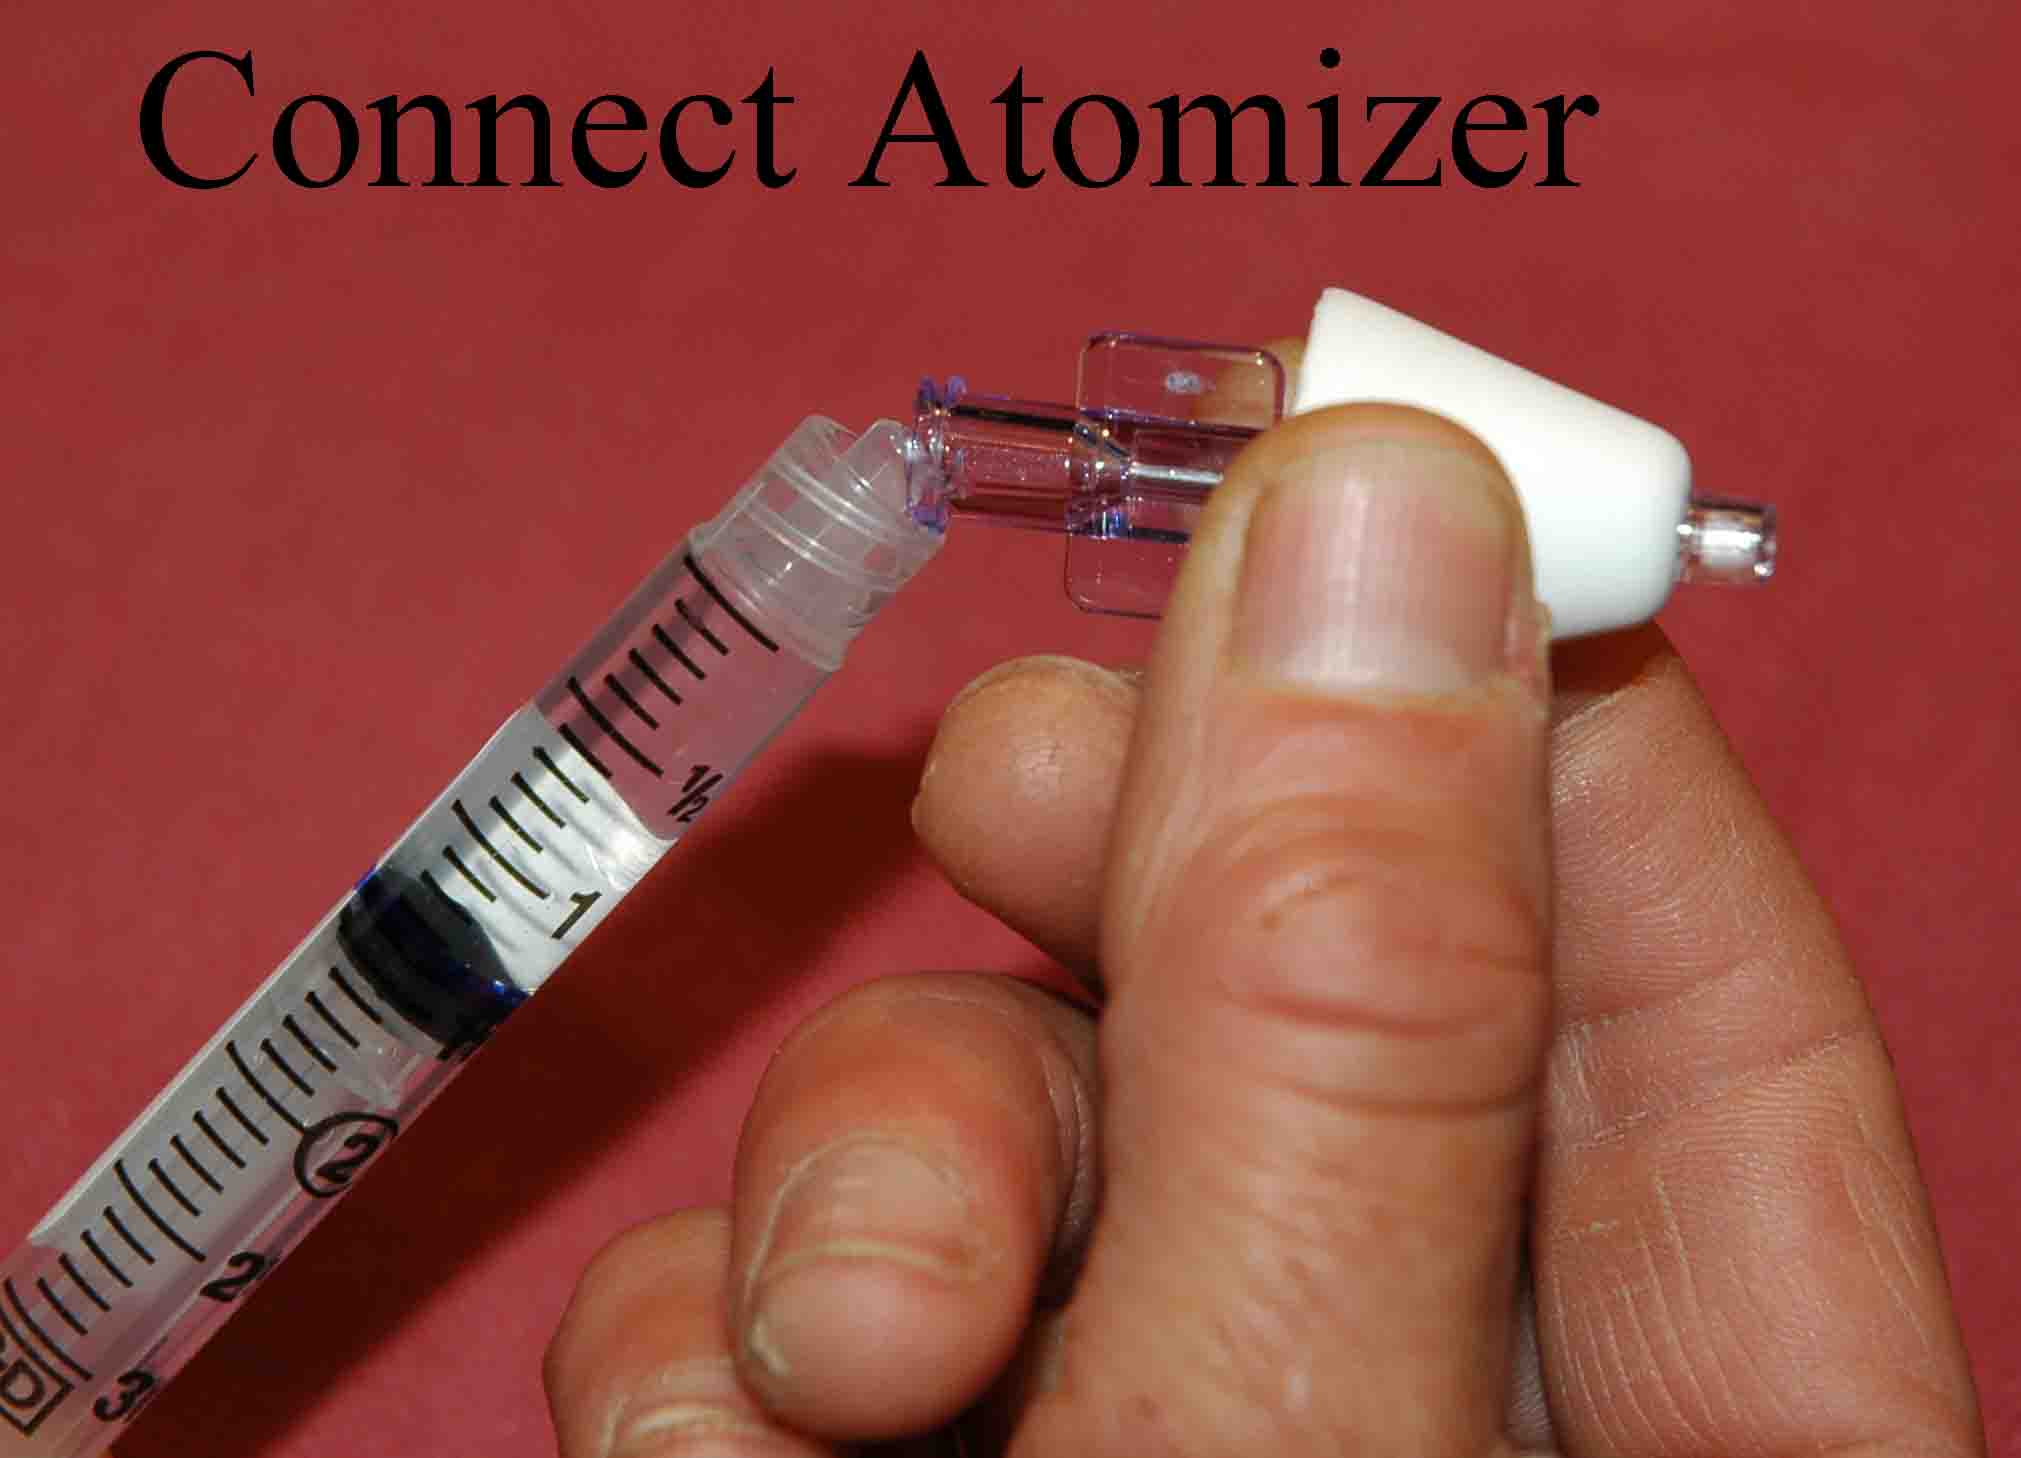 Connect atomizer tip to syringe